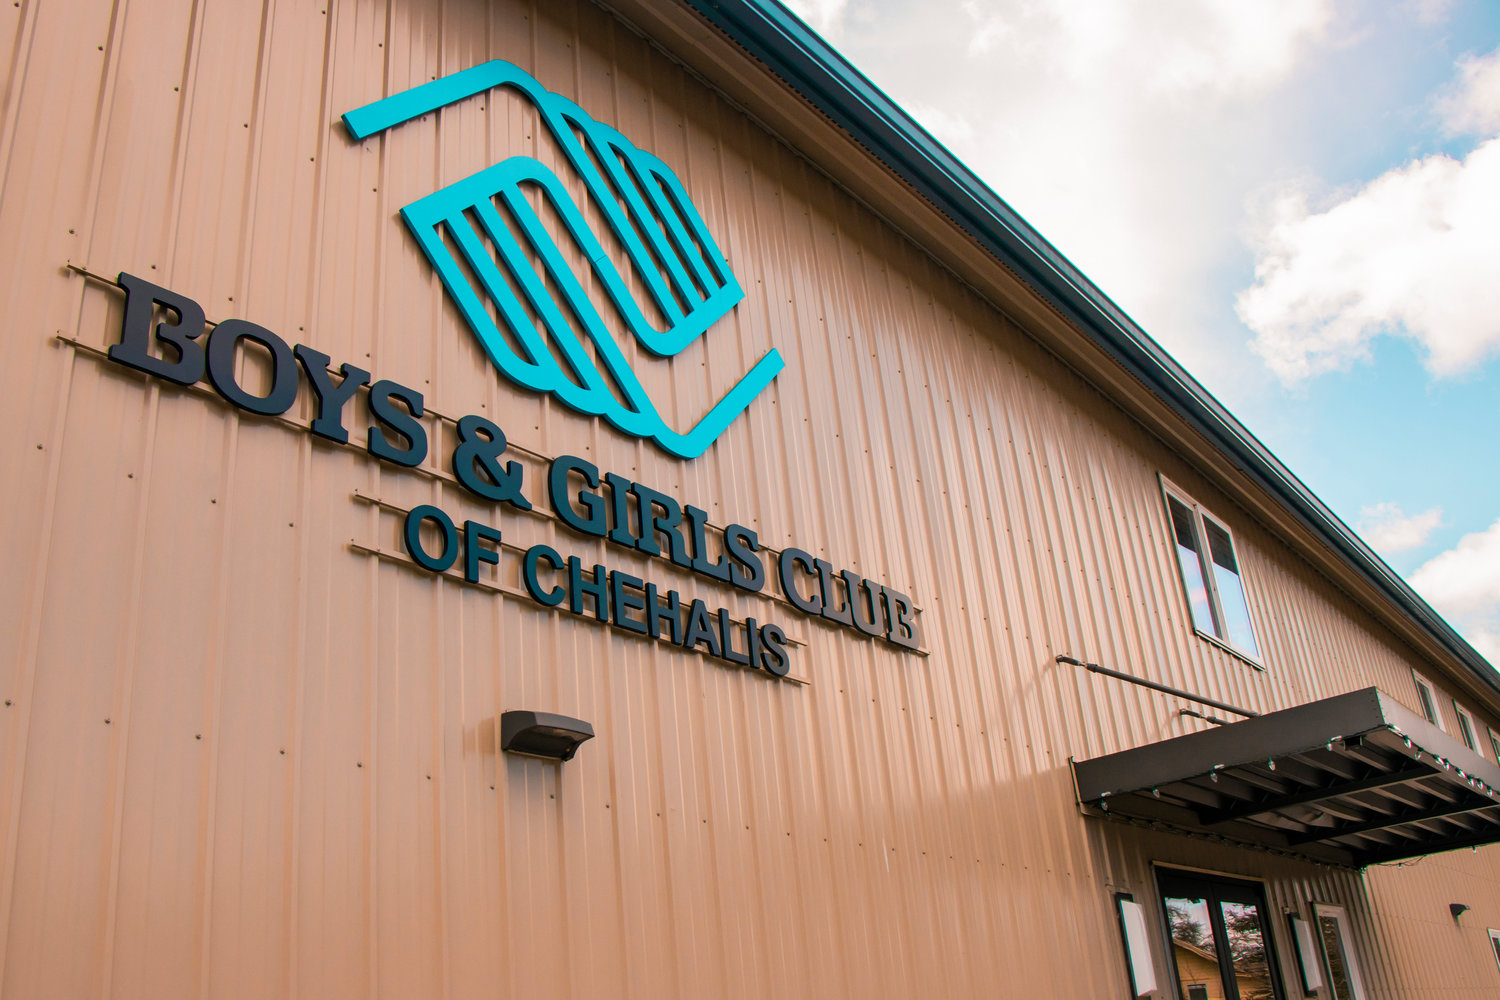 The Boys and Girls Club is located at 2071 Jackson Hwy. in Chehalis.